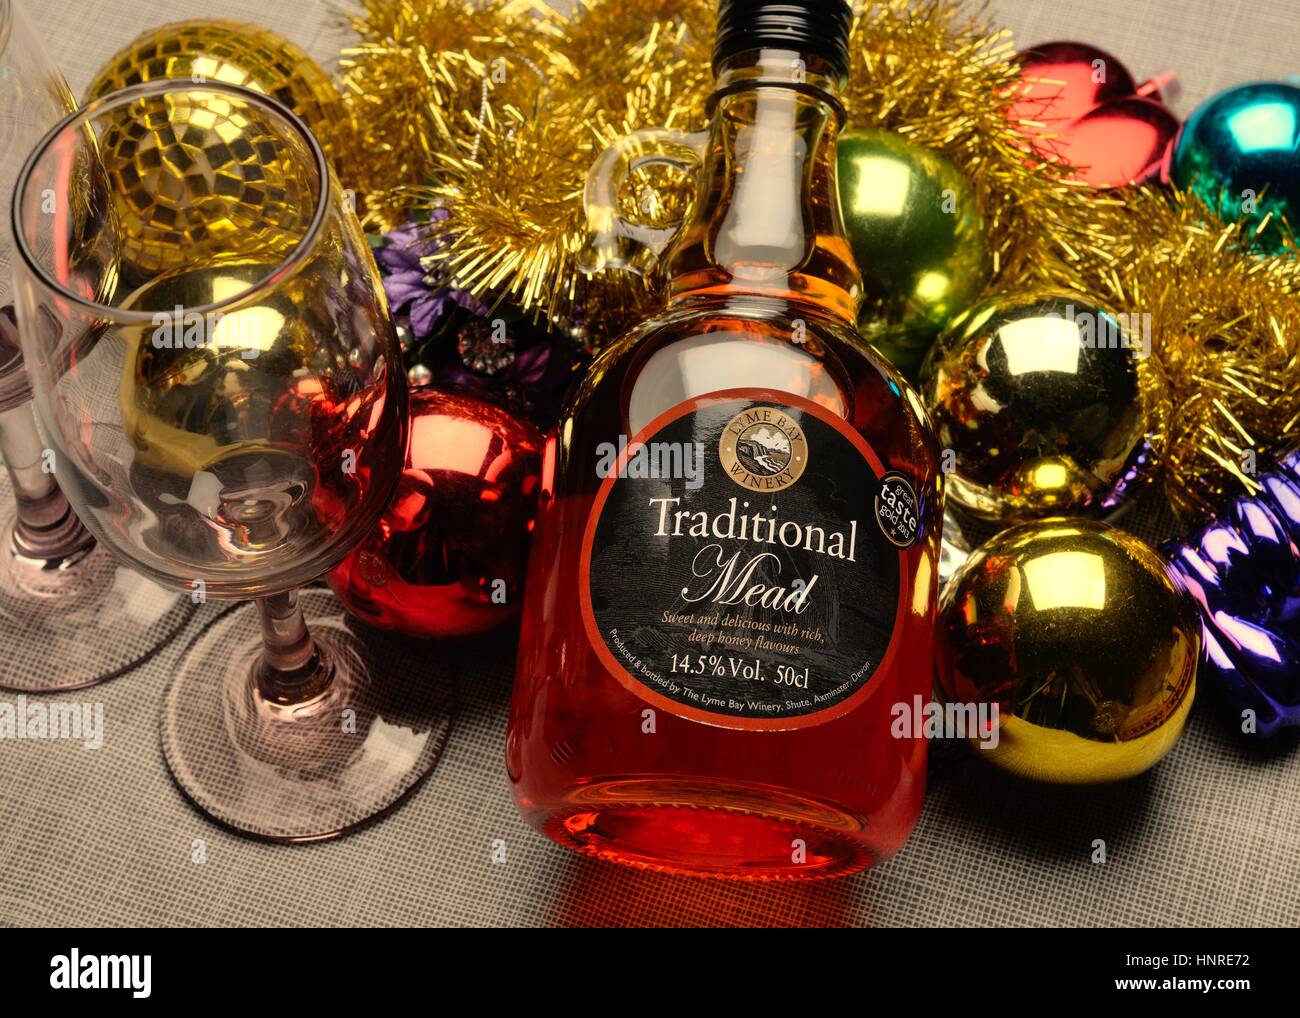 Festive image of tinsel, baubles, drinking glass and bottle of mead Stock Photo